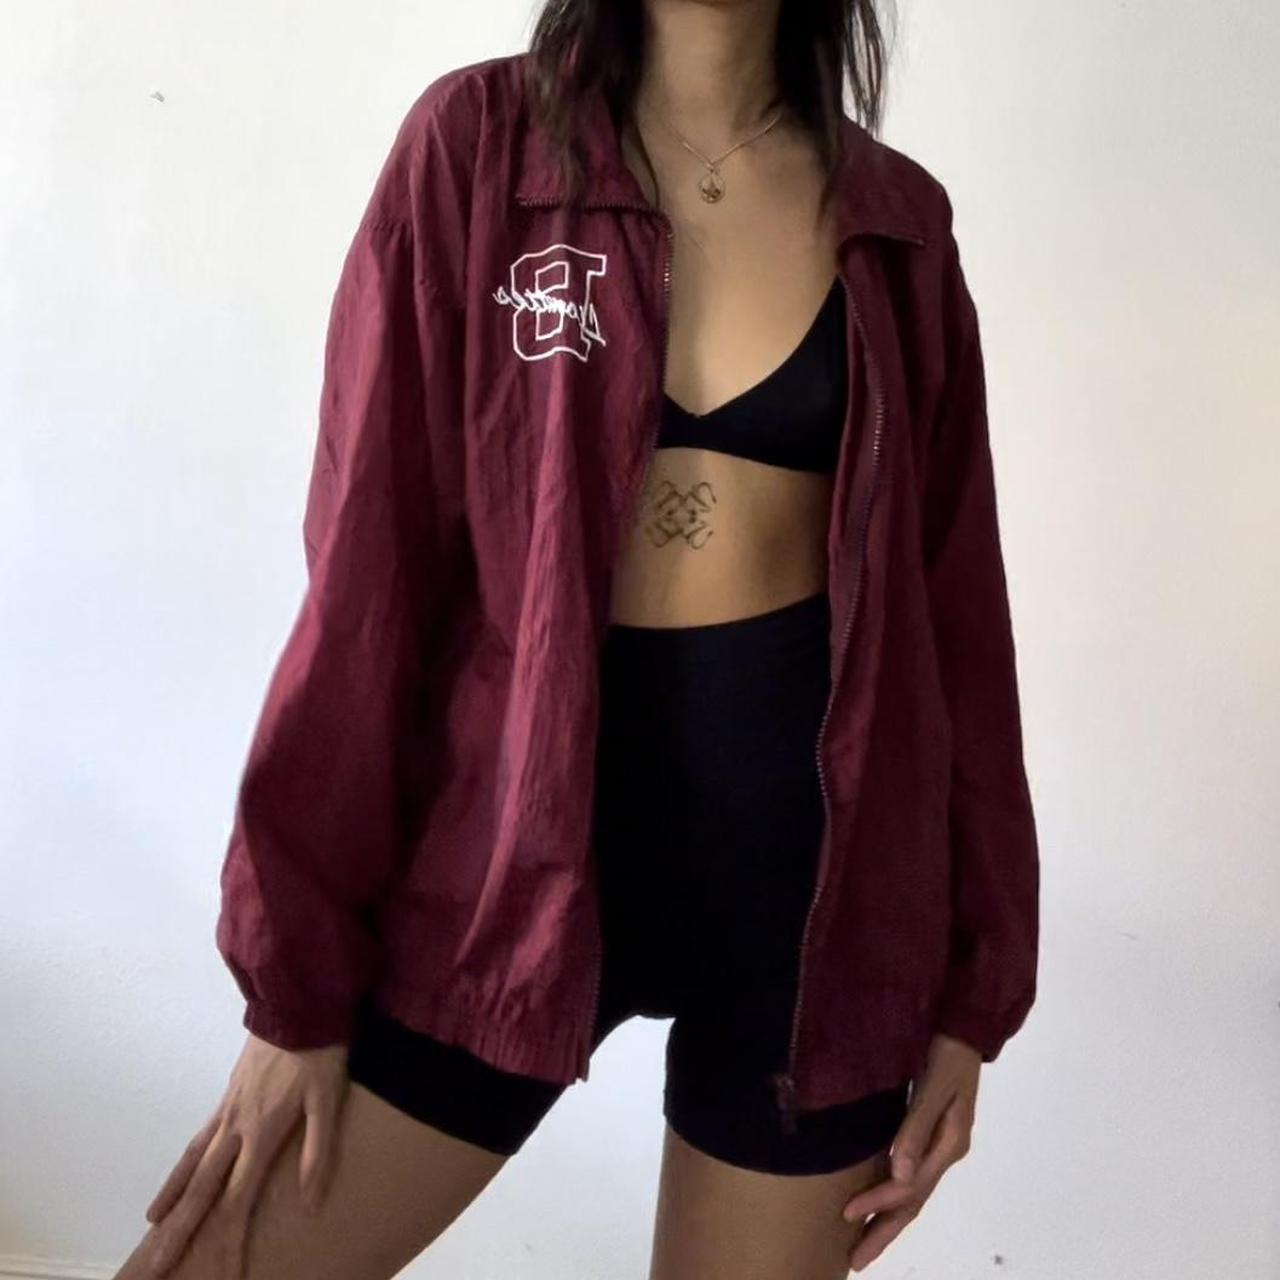 Product Image 1 - Vintage Maroon Windbreaker

Bought this at